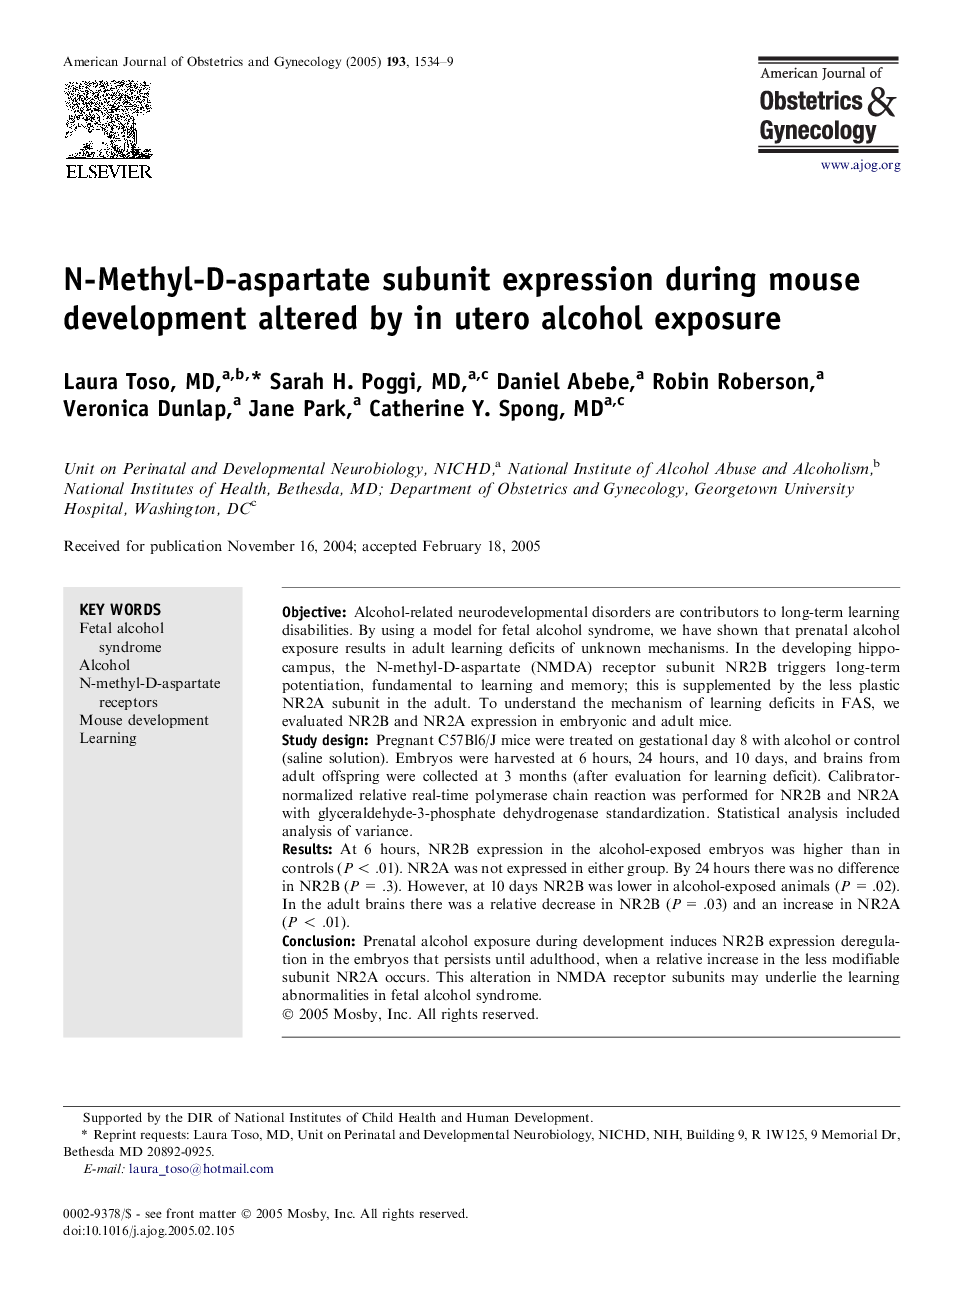 N-Methyl-D-aspartate subunit expression during mouse development altered by in utero alcohol exposure